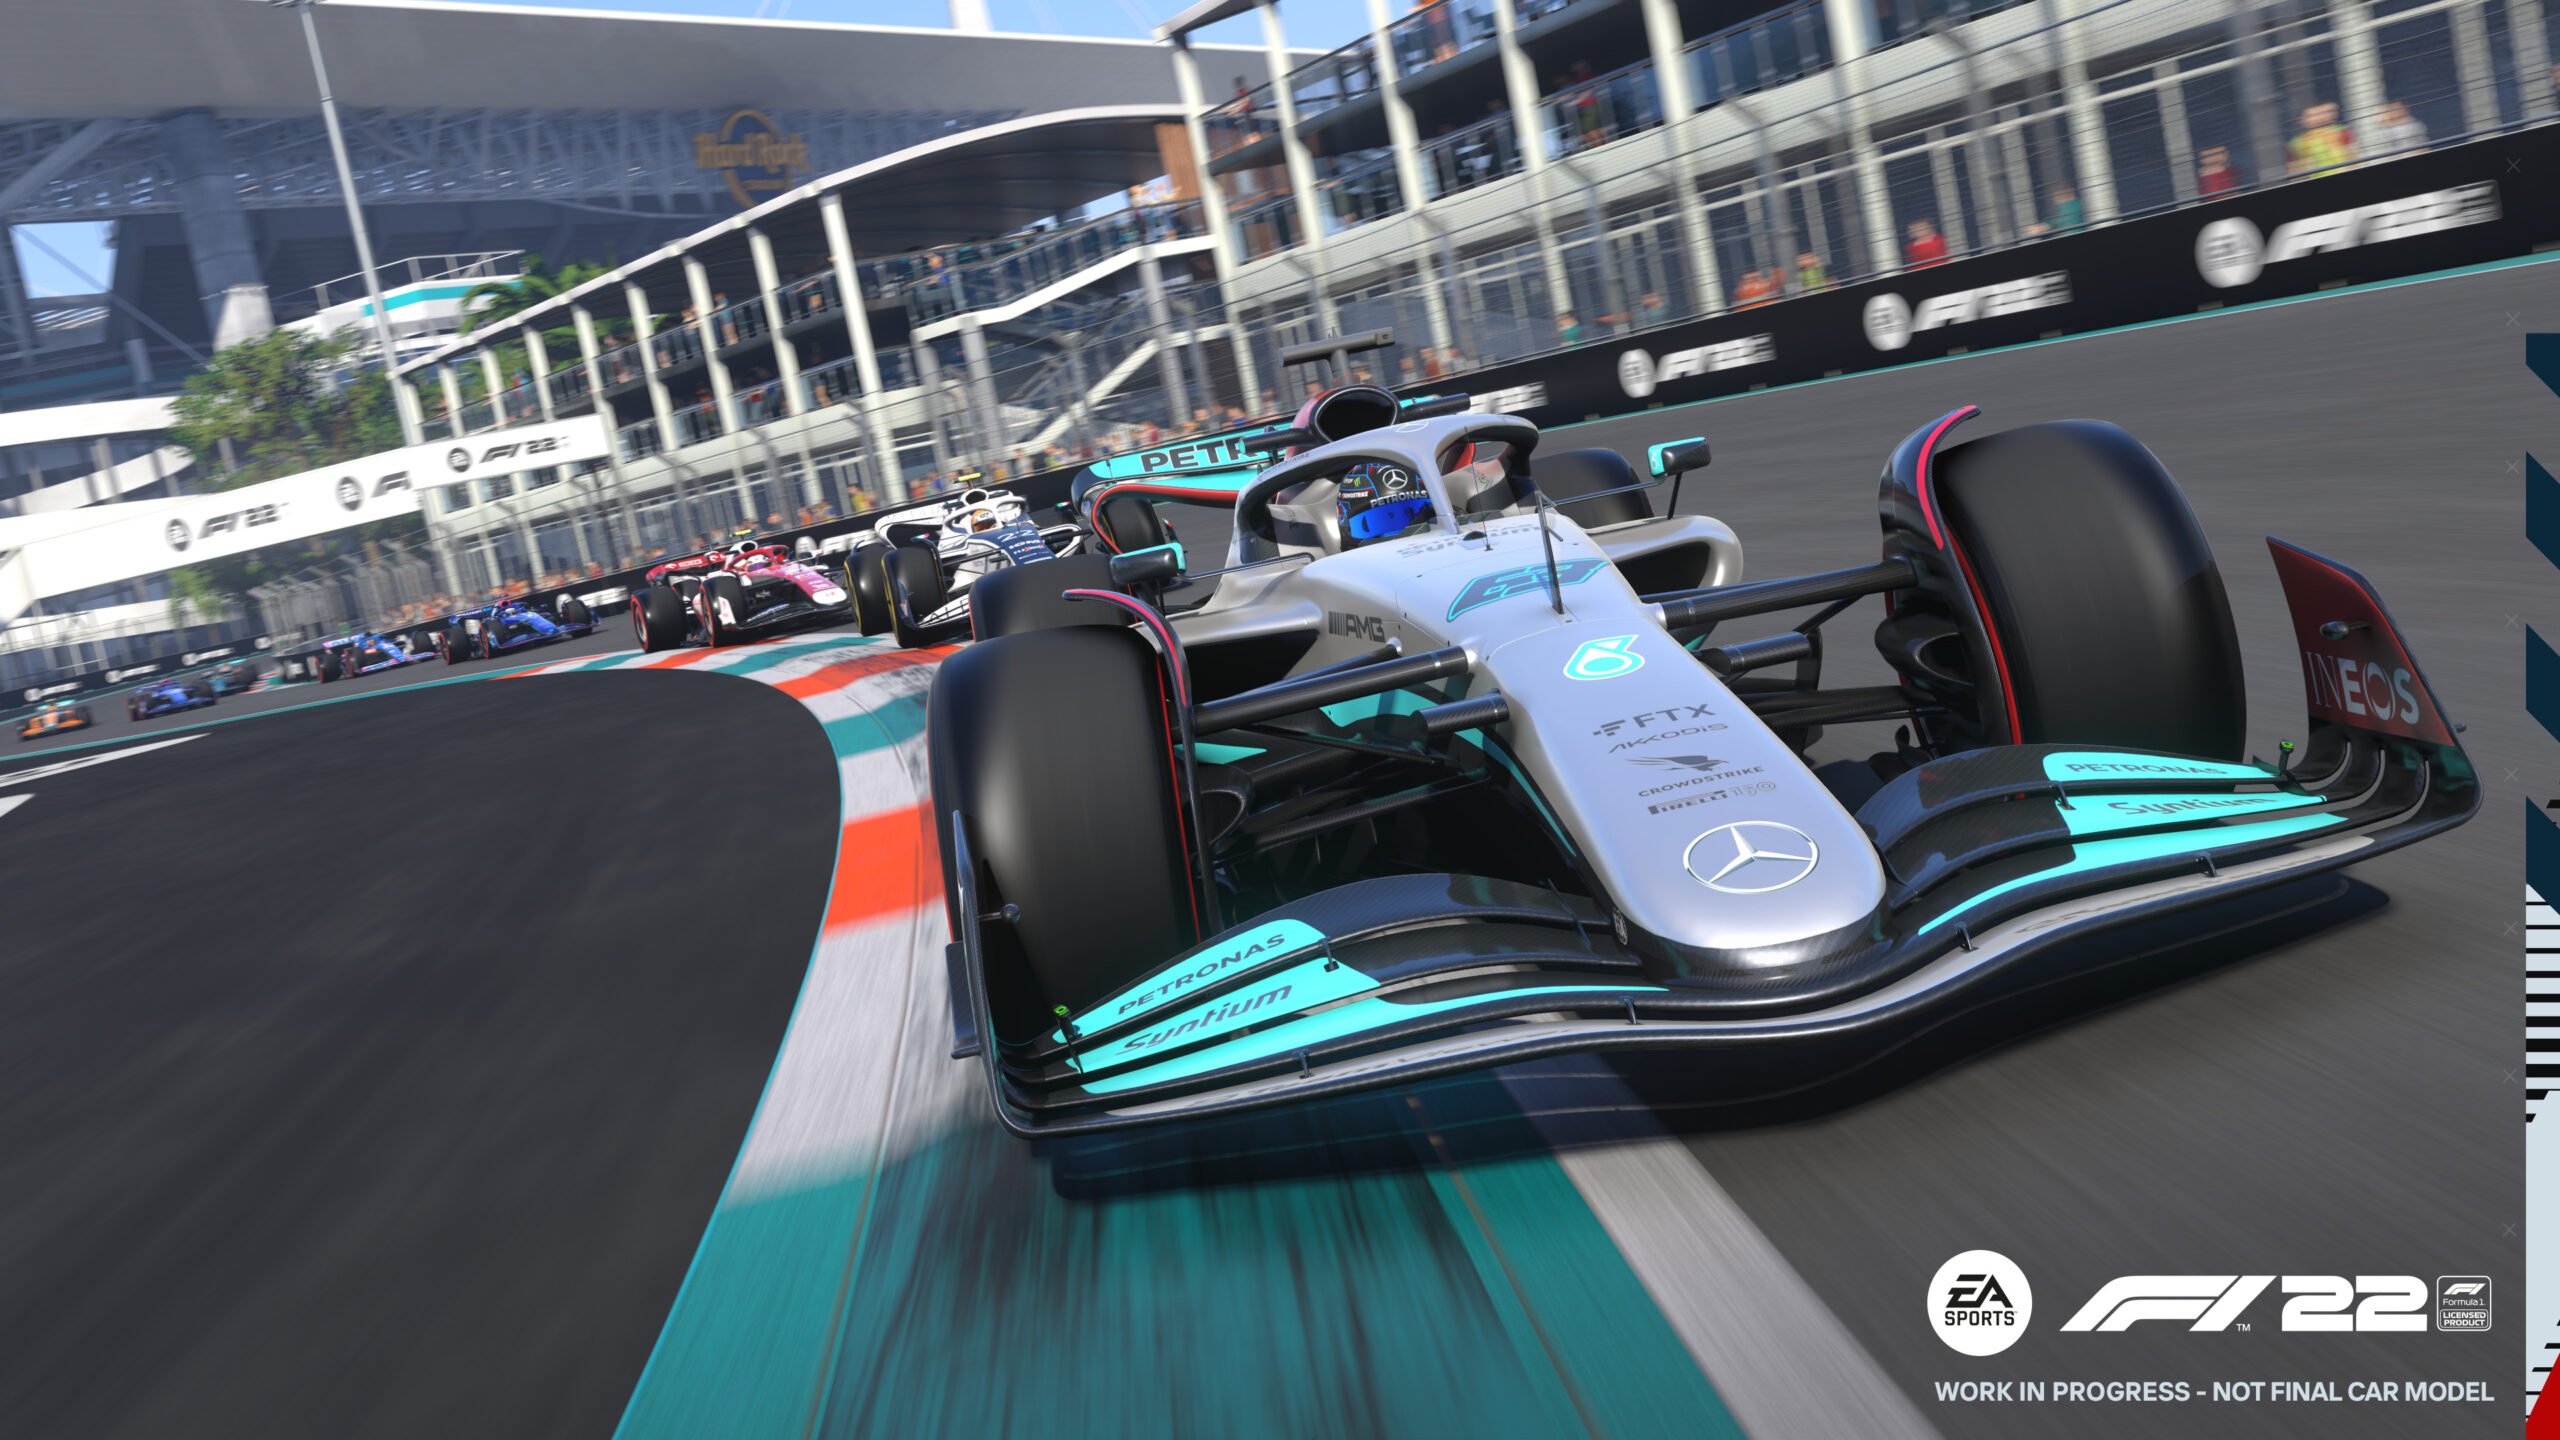 F1 22 on Steam is 84% off ($9.59) and support VR : r/virtualreality